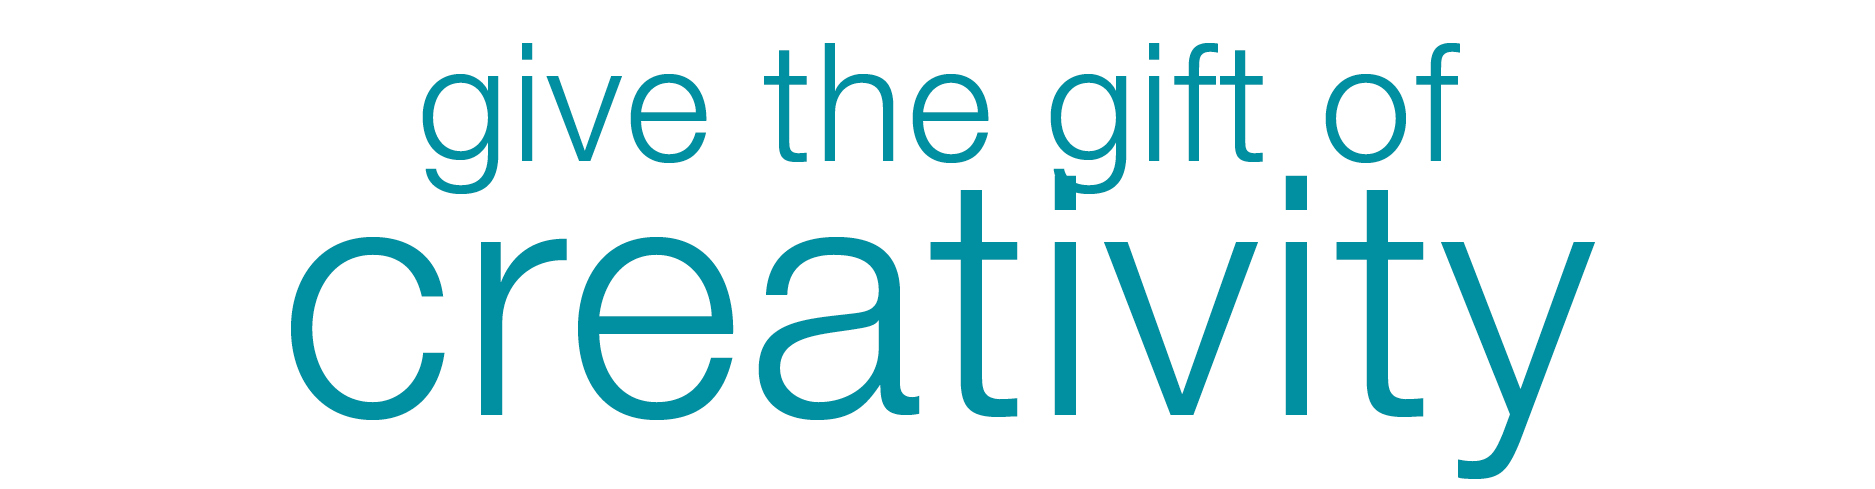 Give the gift of CREATIVITY